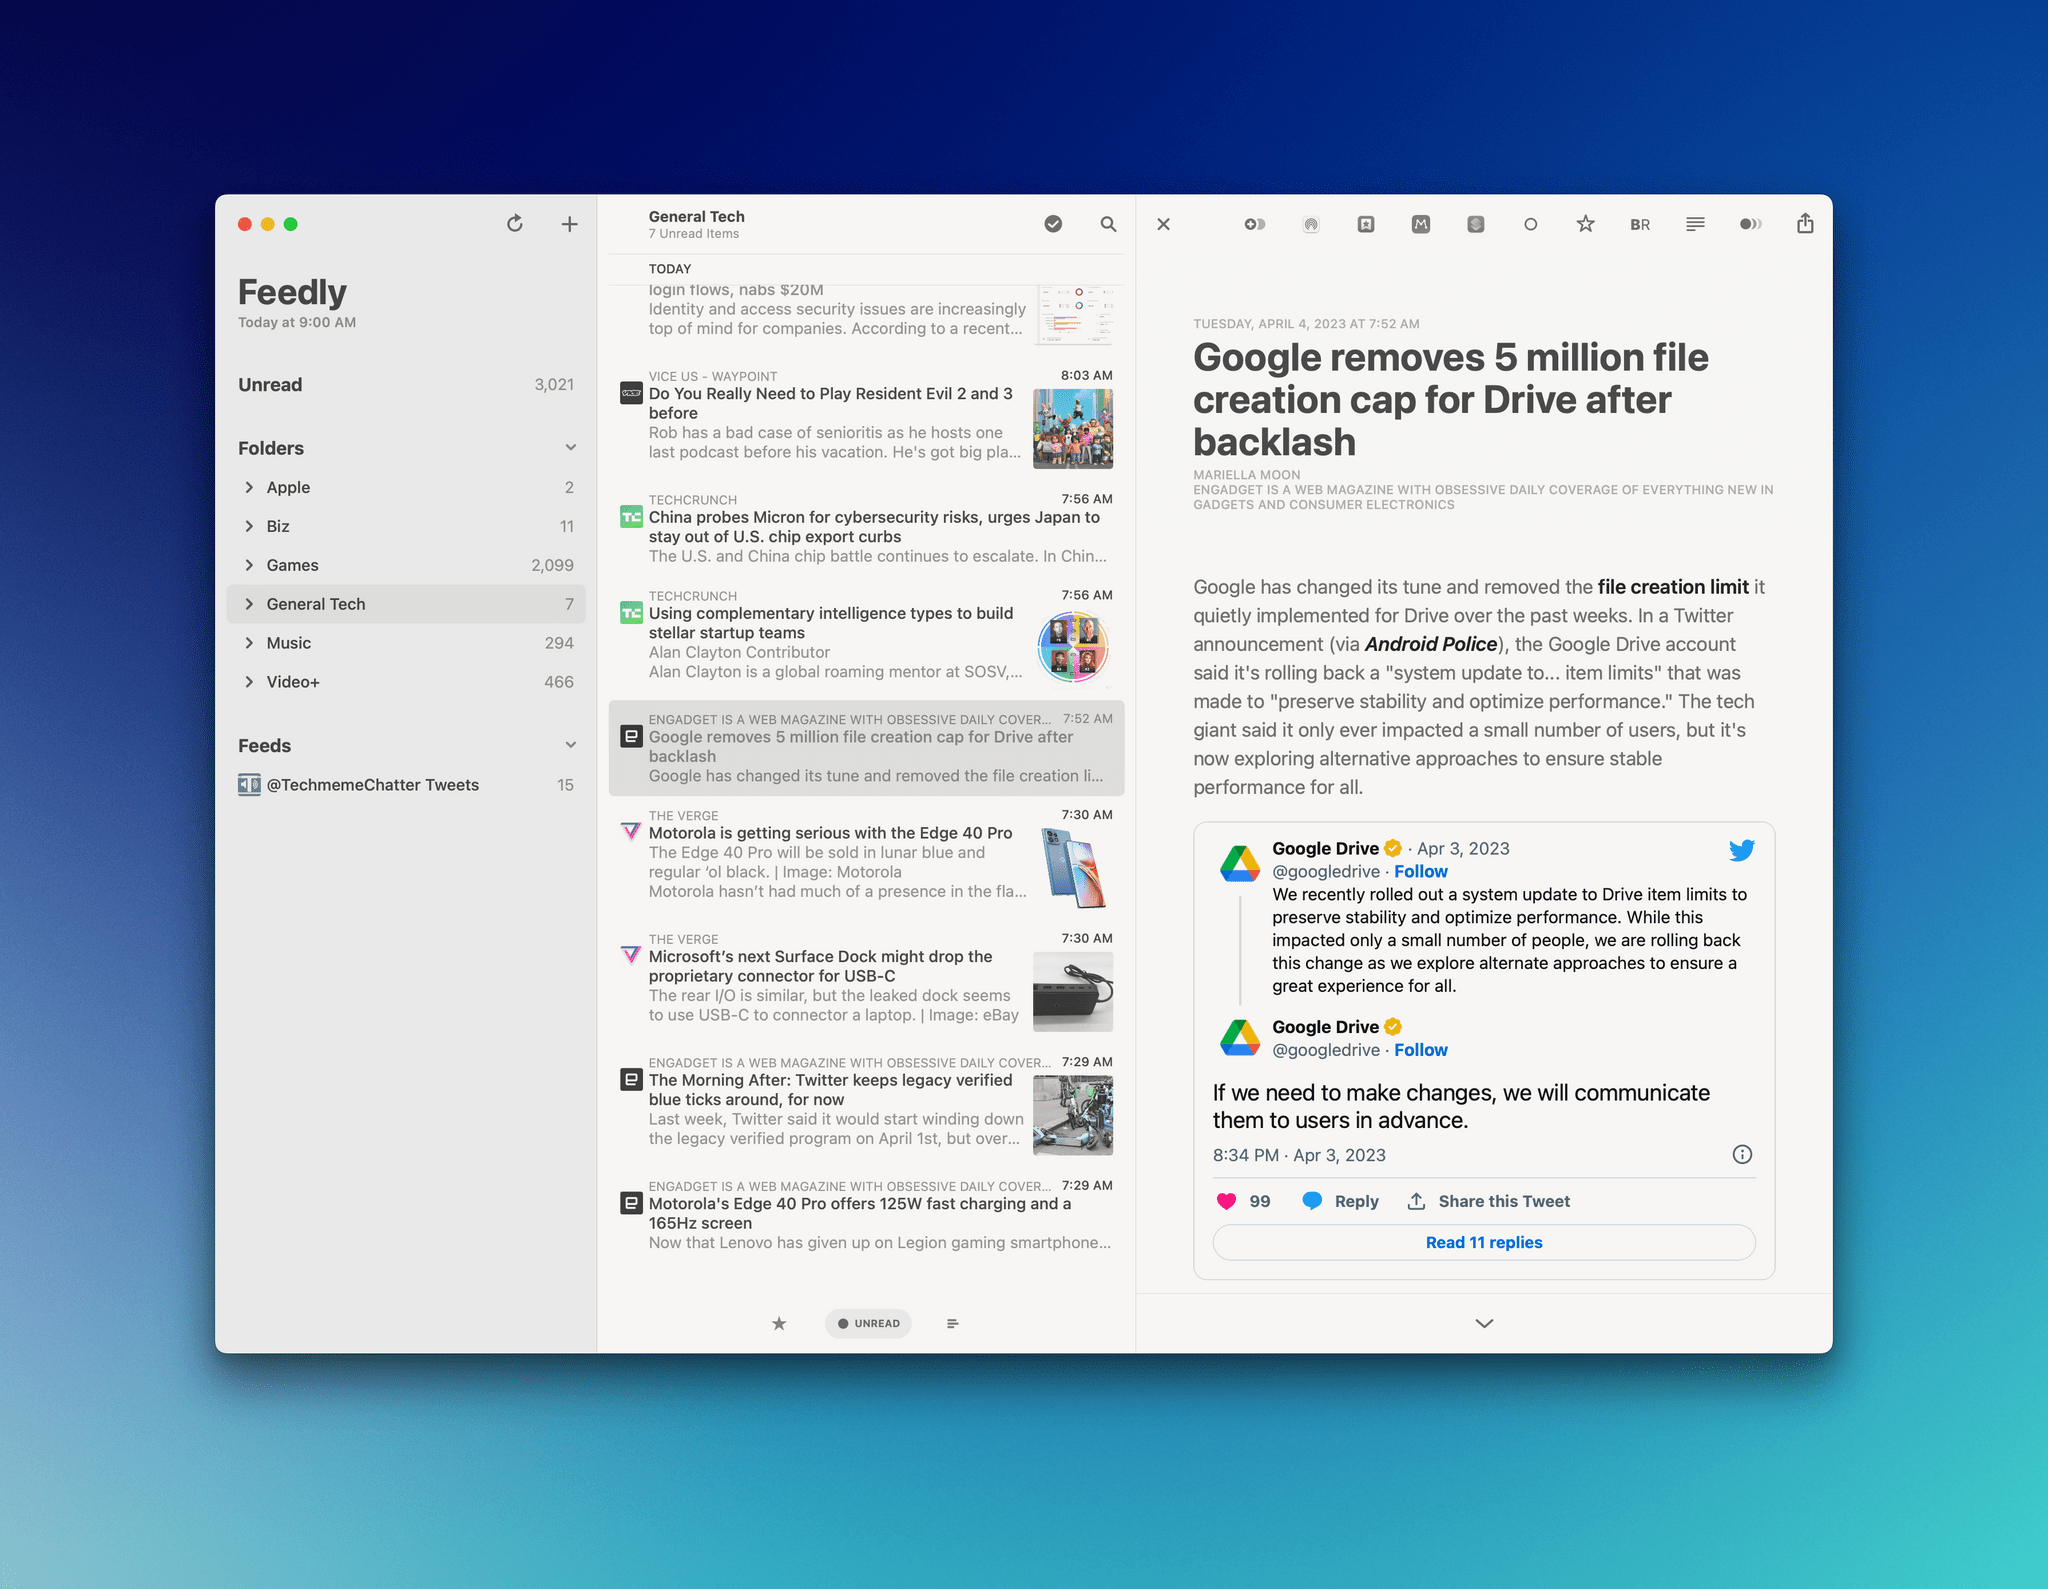 Catching up on the latest news in Reeder using [Feedly](https://feedly.com) to sync my RSS feeds.